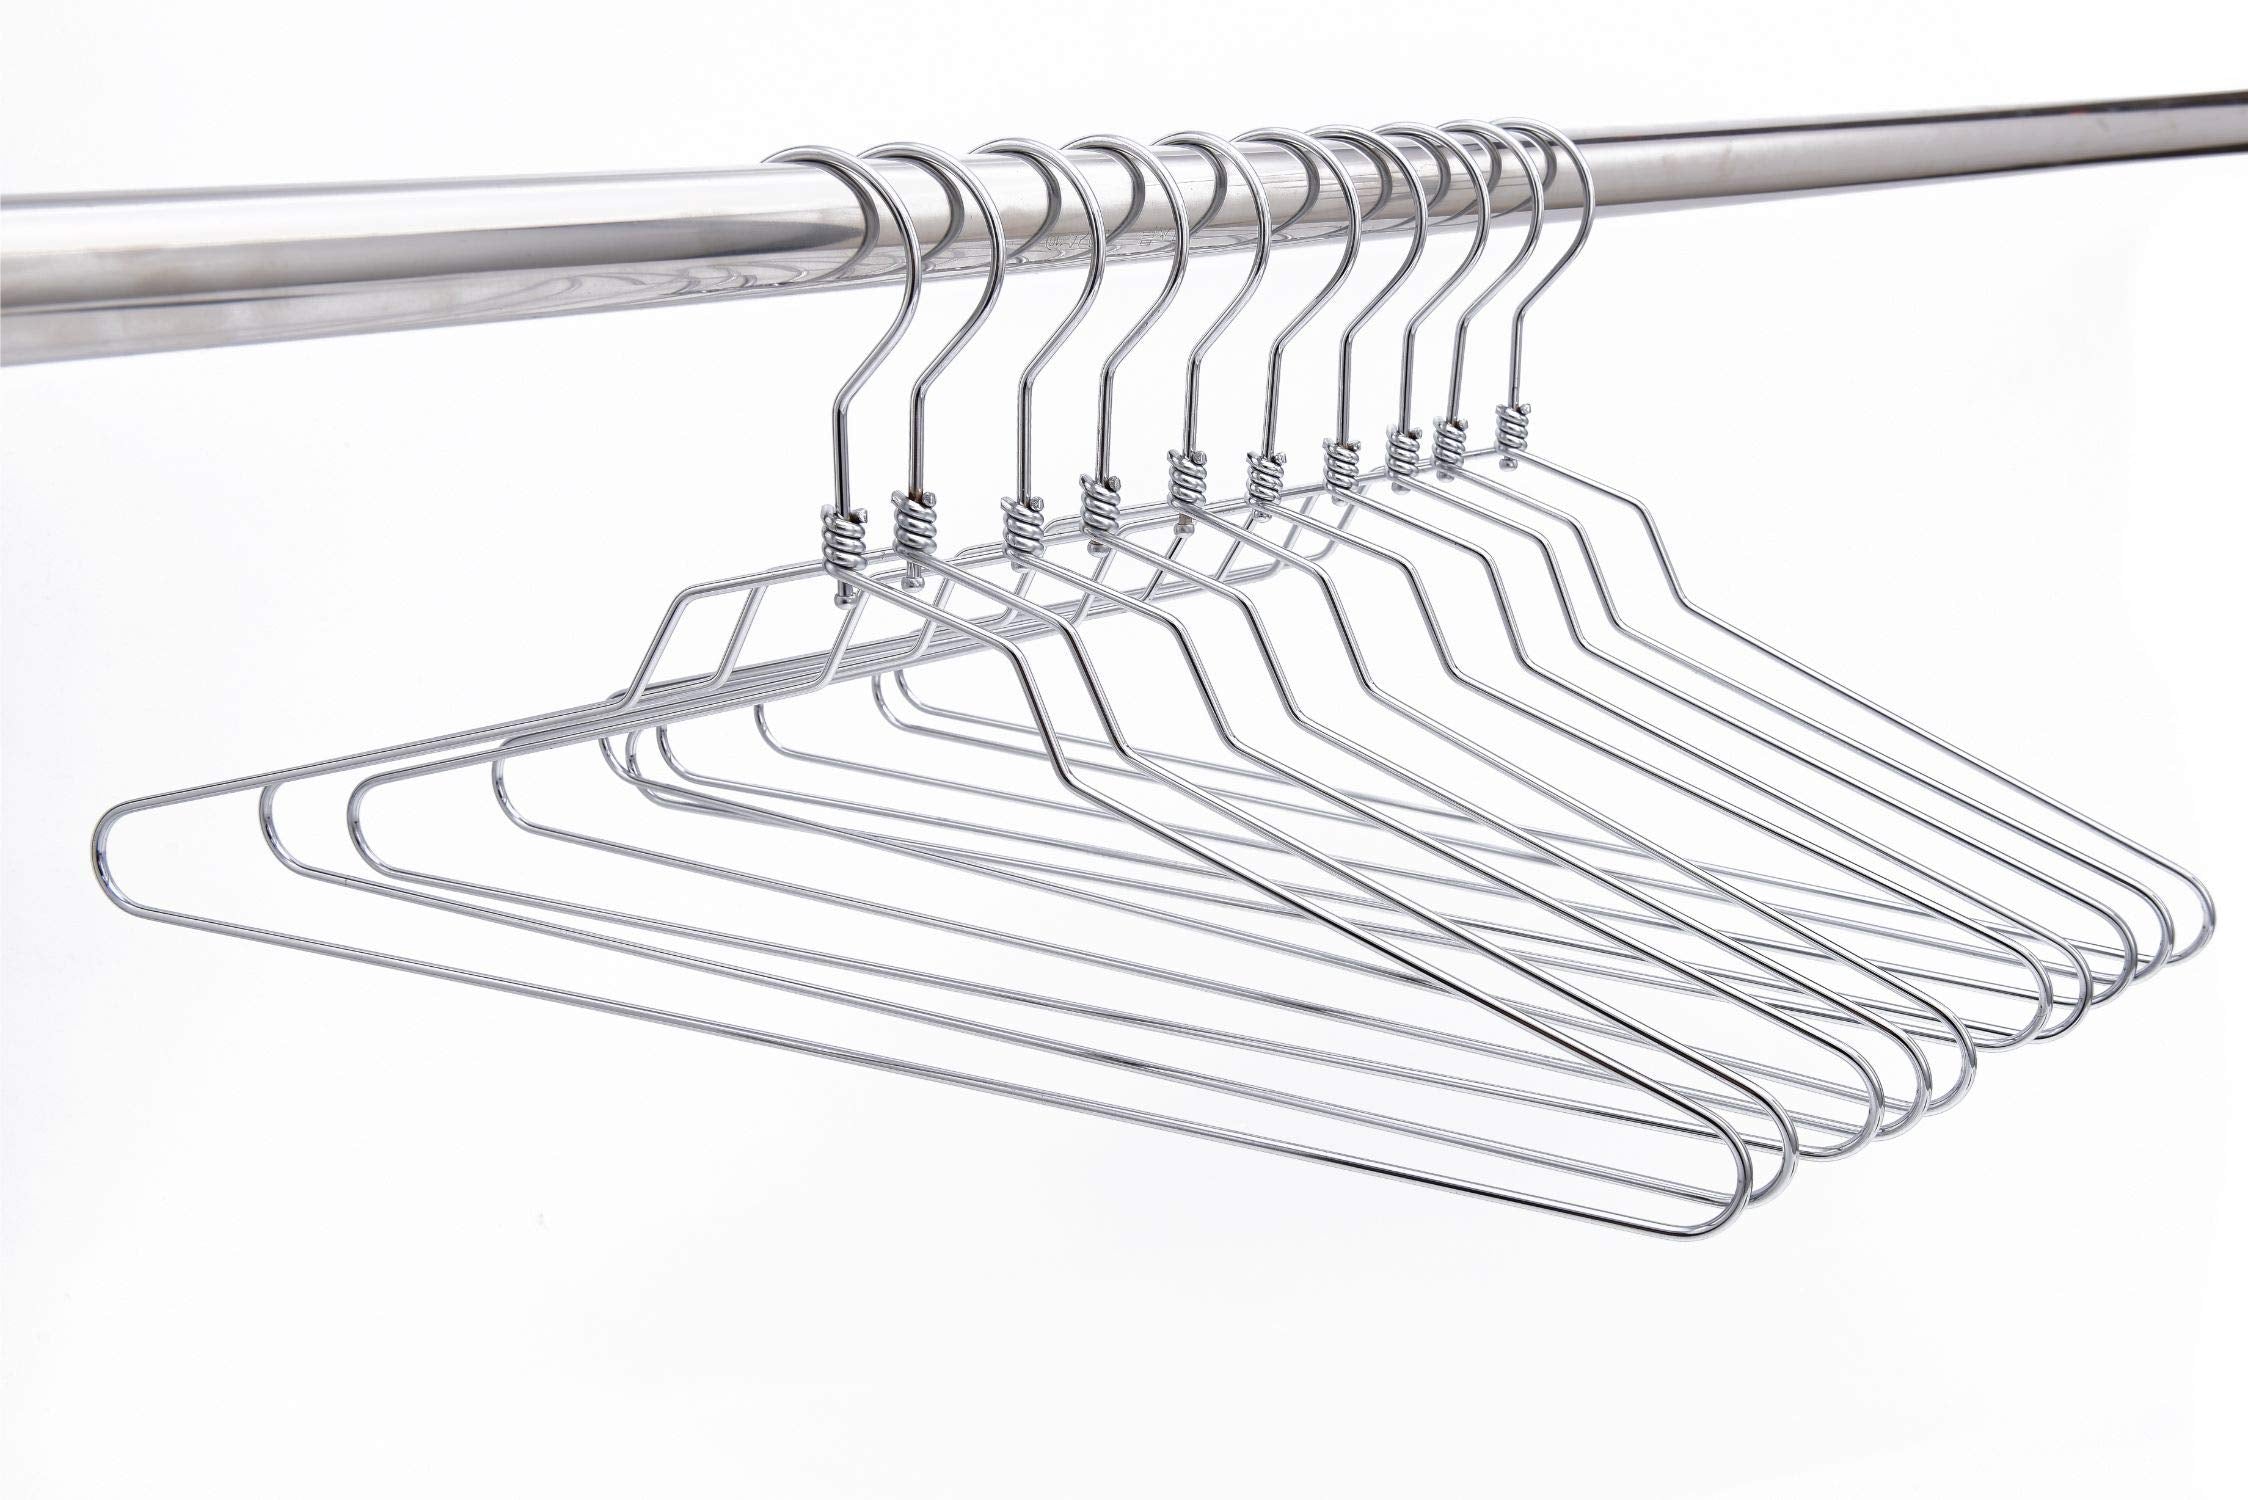 16" Quality Metal Hangers, 30-Pack, Swivel Hook, Stainless Steel Heavy Duty Wire Clothes Hangers, Heavy-Duty Clothes, Jacket, Shirt, Pants, Suit Hangers  - Like New